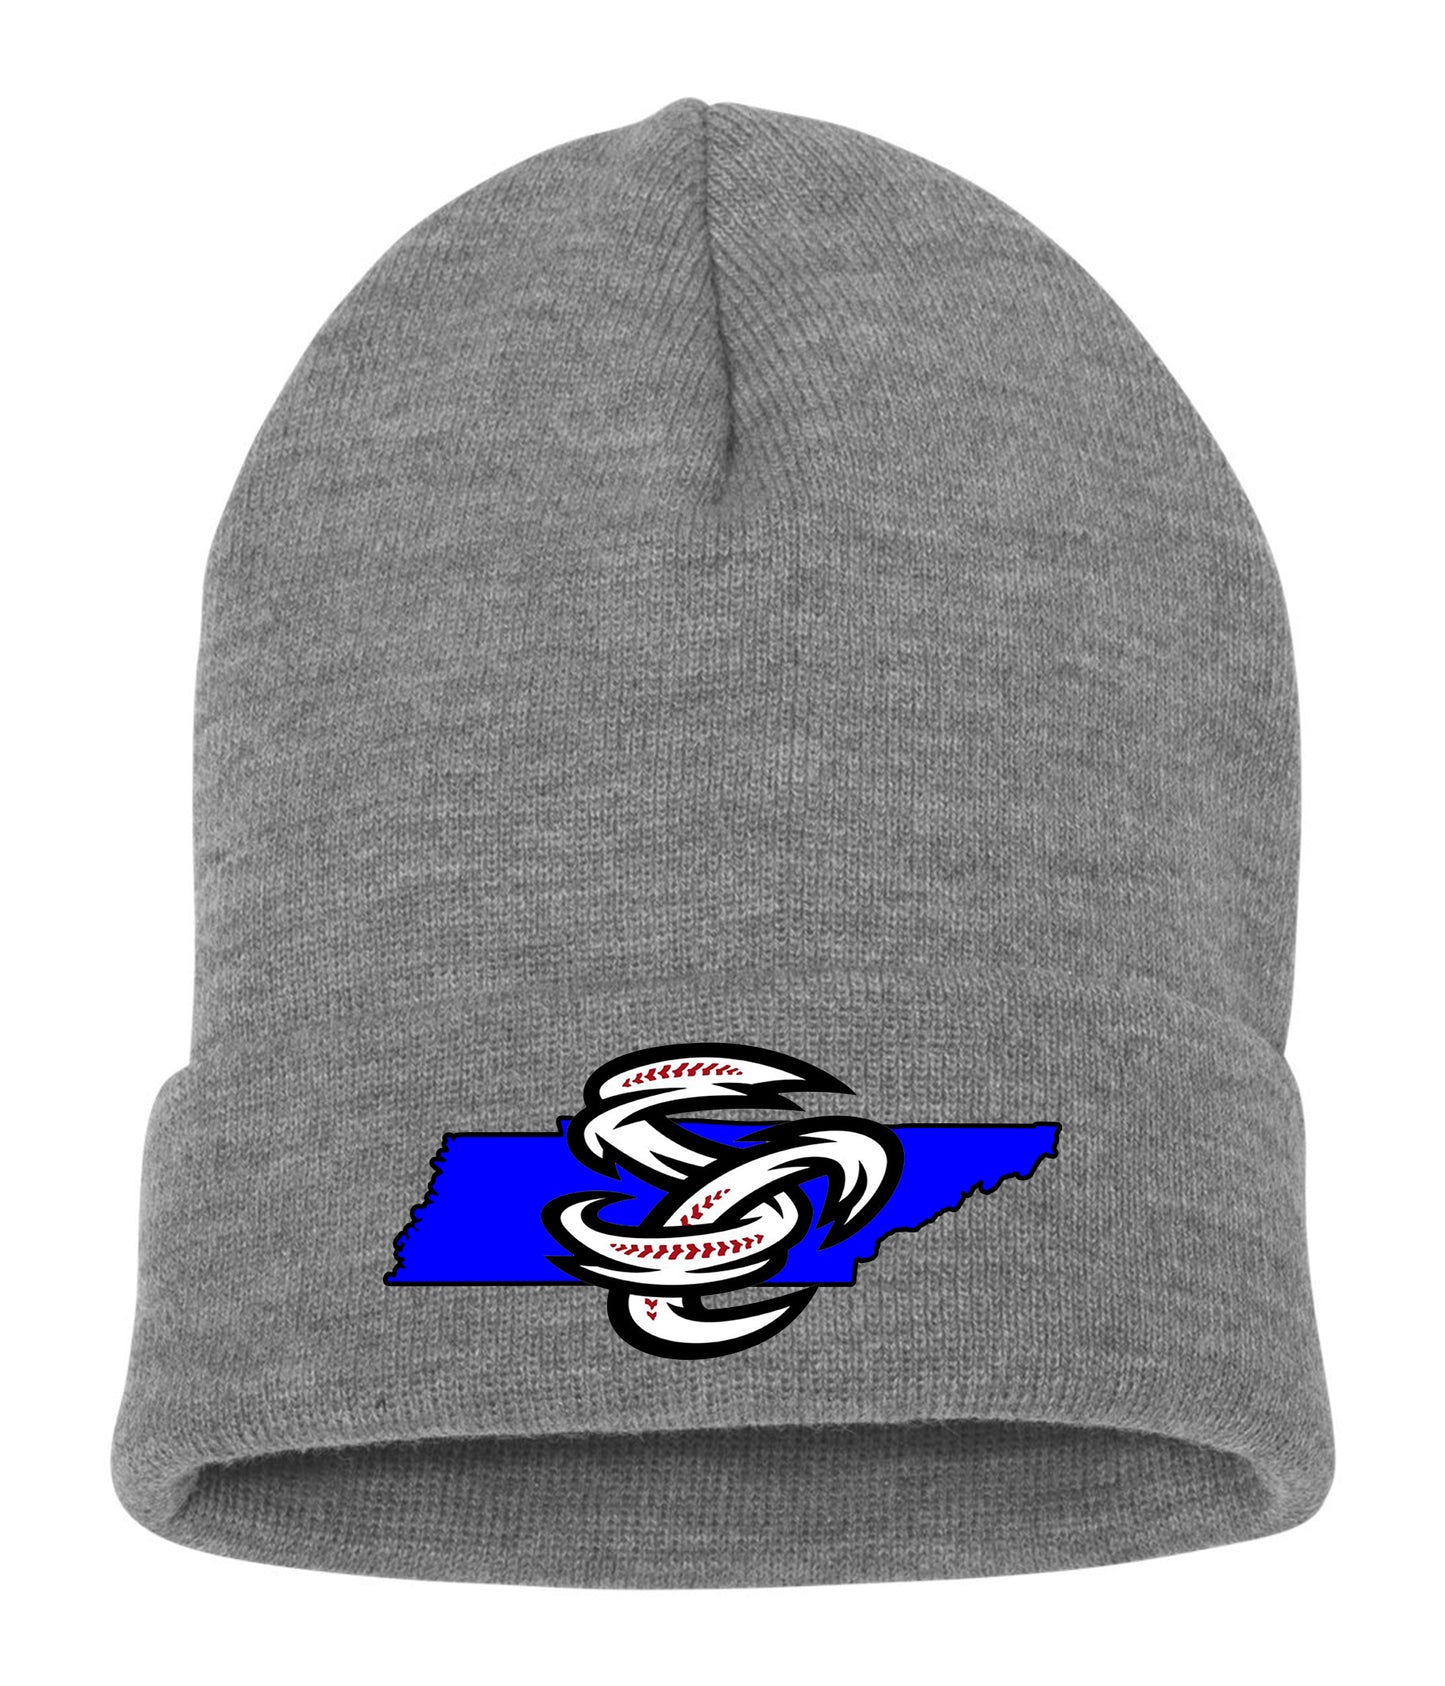 Stormchasers TN State Beanie